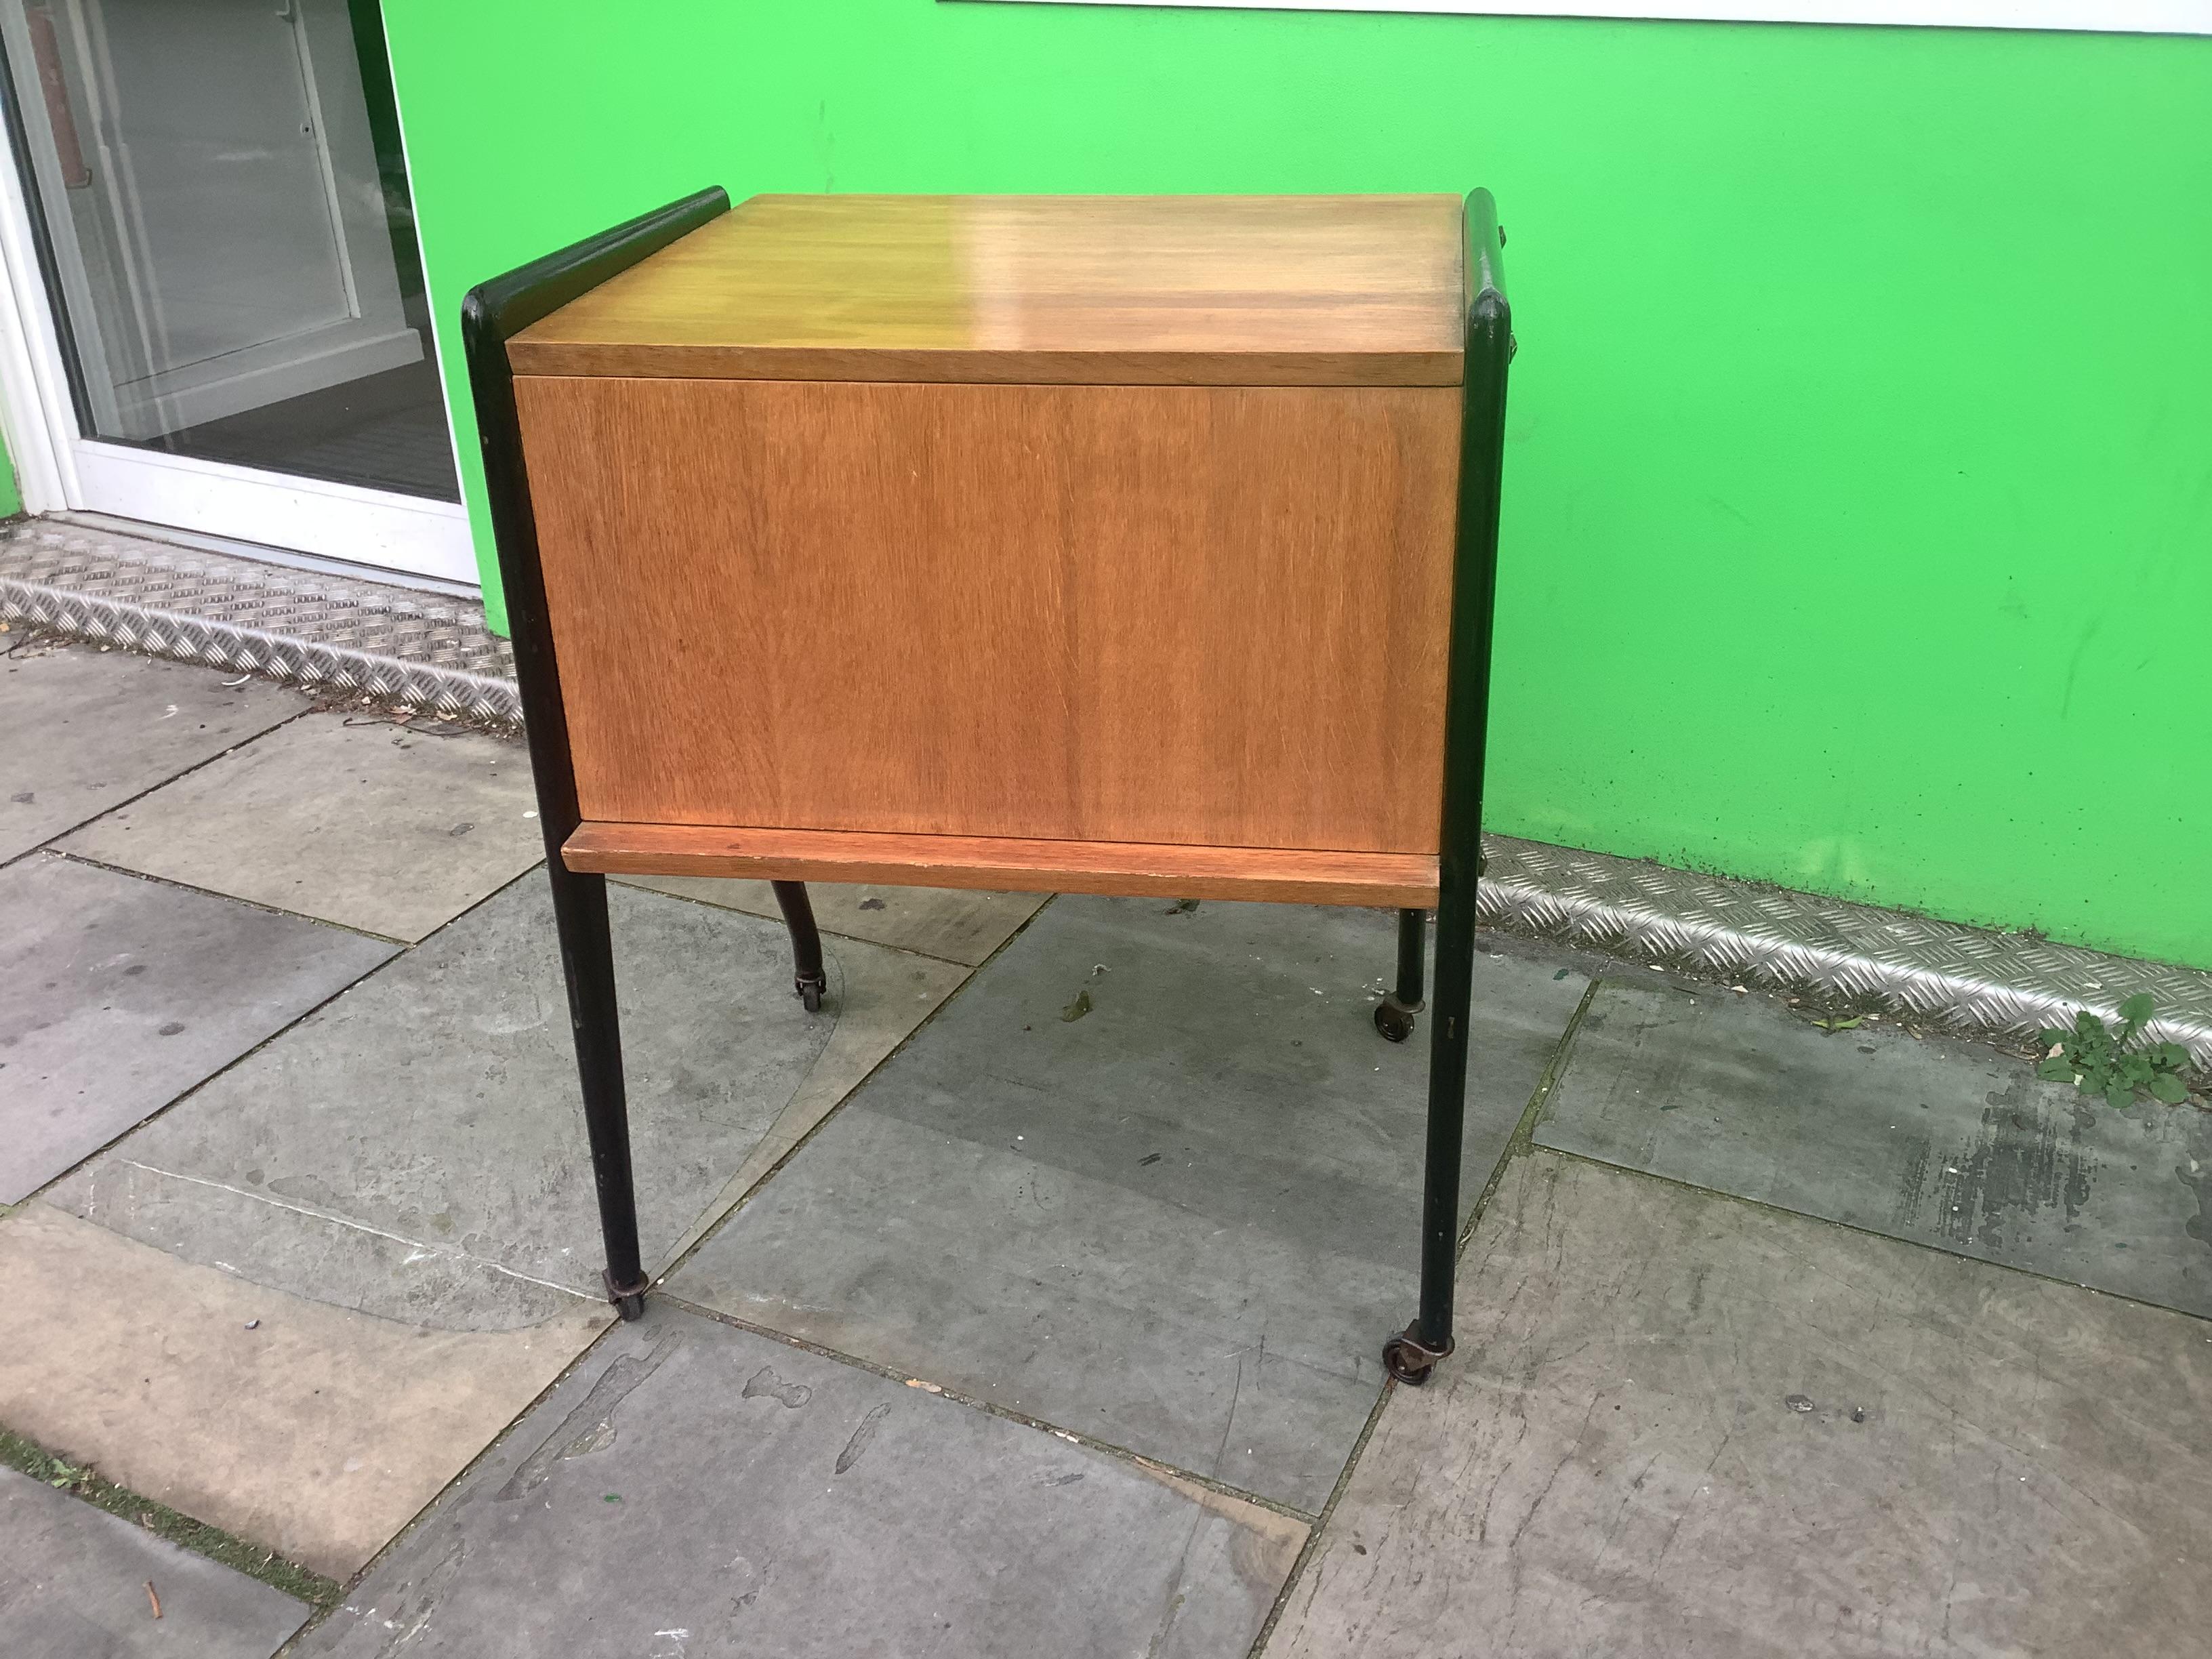 1950s Television table/desk from Televise In Good Condition For Sale In London, Lambeth